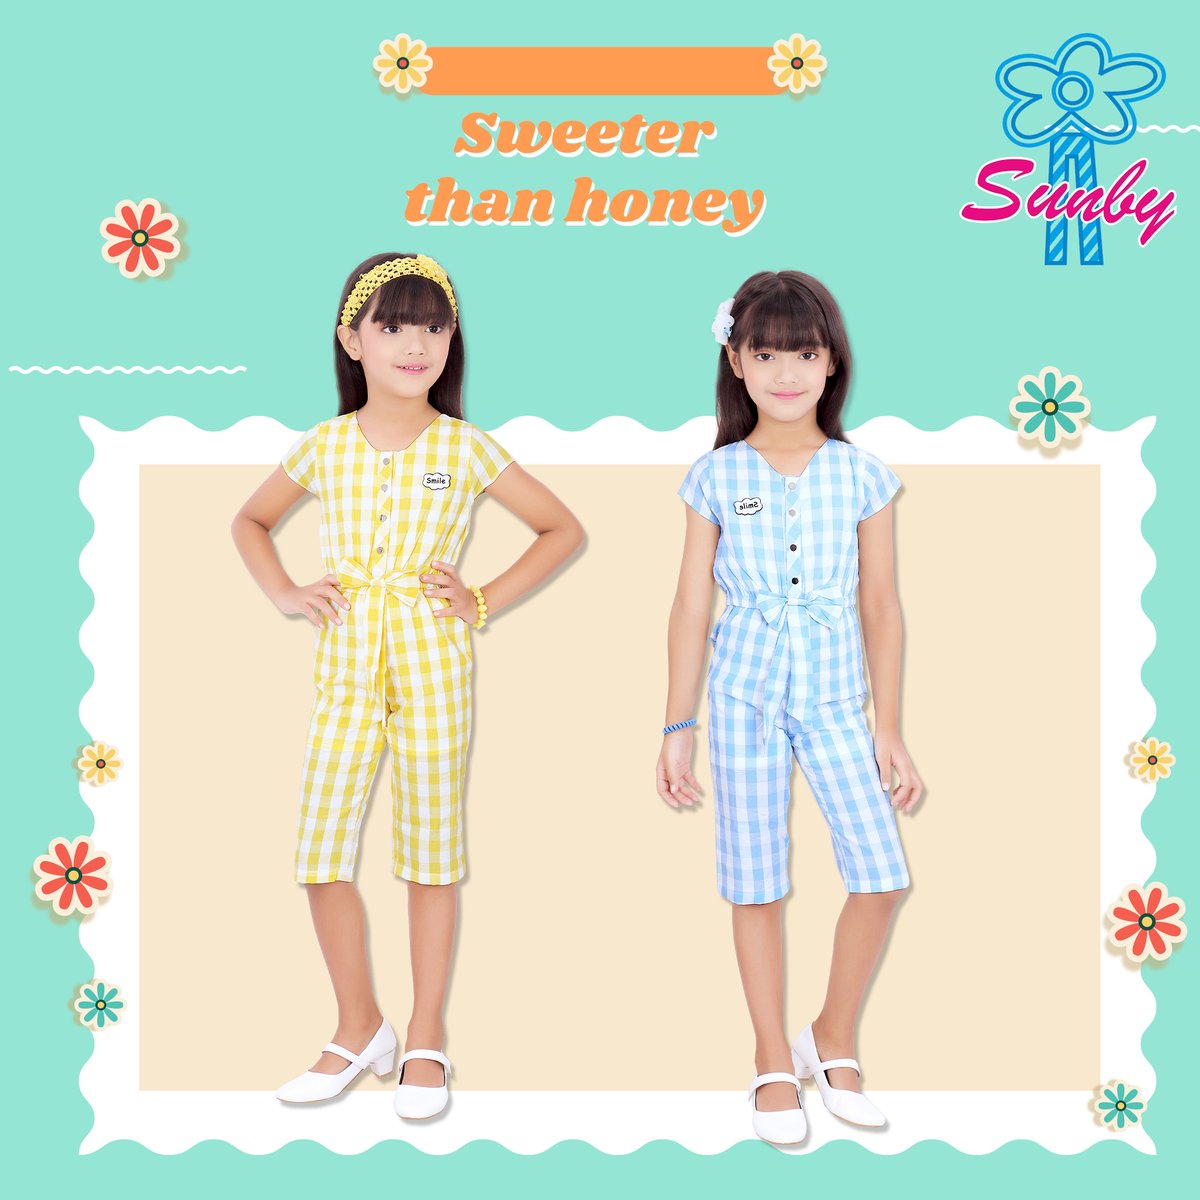 Sweeter than honey SUNBY Jumpsuits - Checks - woww..

#LittleCowgirl #WesternFashionKids #RodeoPrincess #WildWestKids
#CowgirlStyle #sunbyclothing #WesternChic